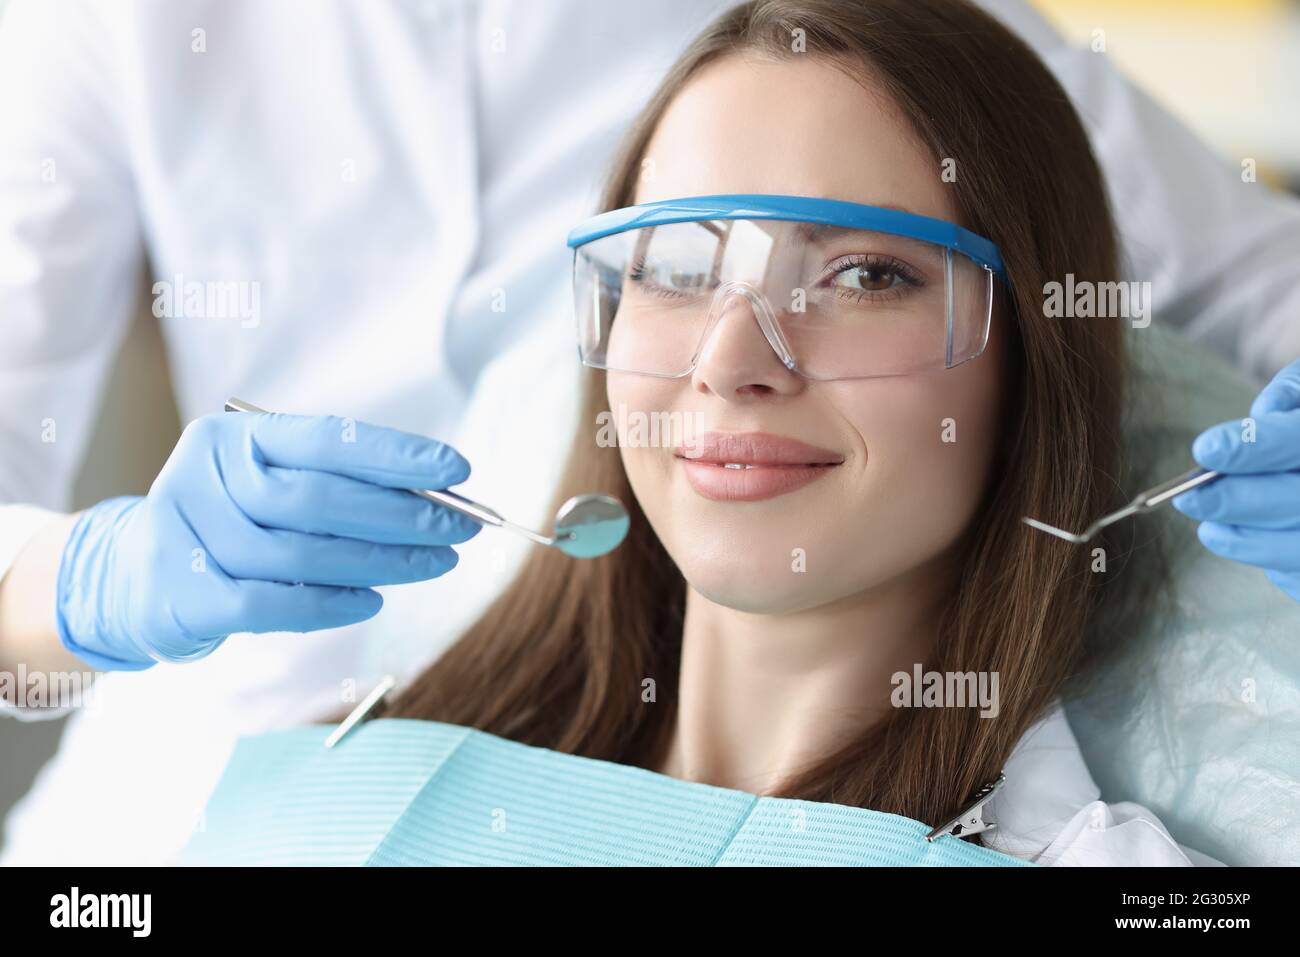 Portrait of beautiful woman at dentist appointment Stock Photo